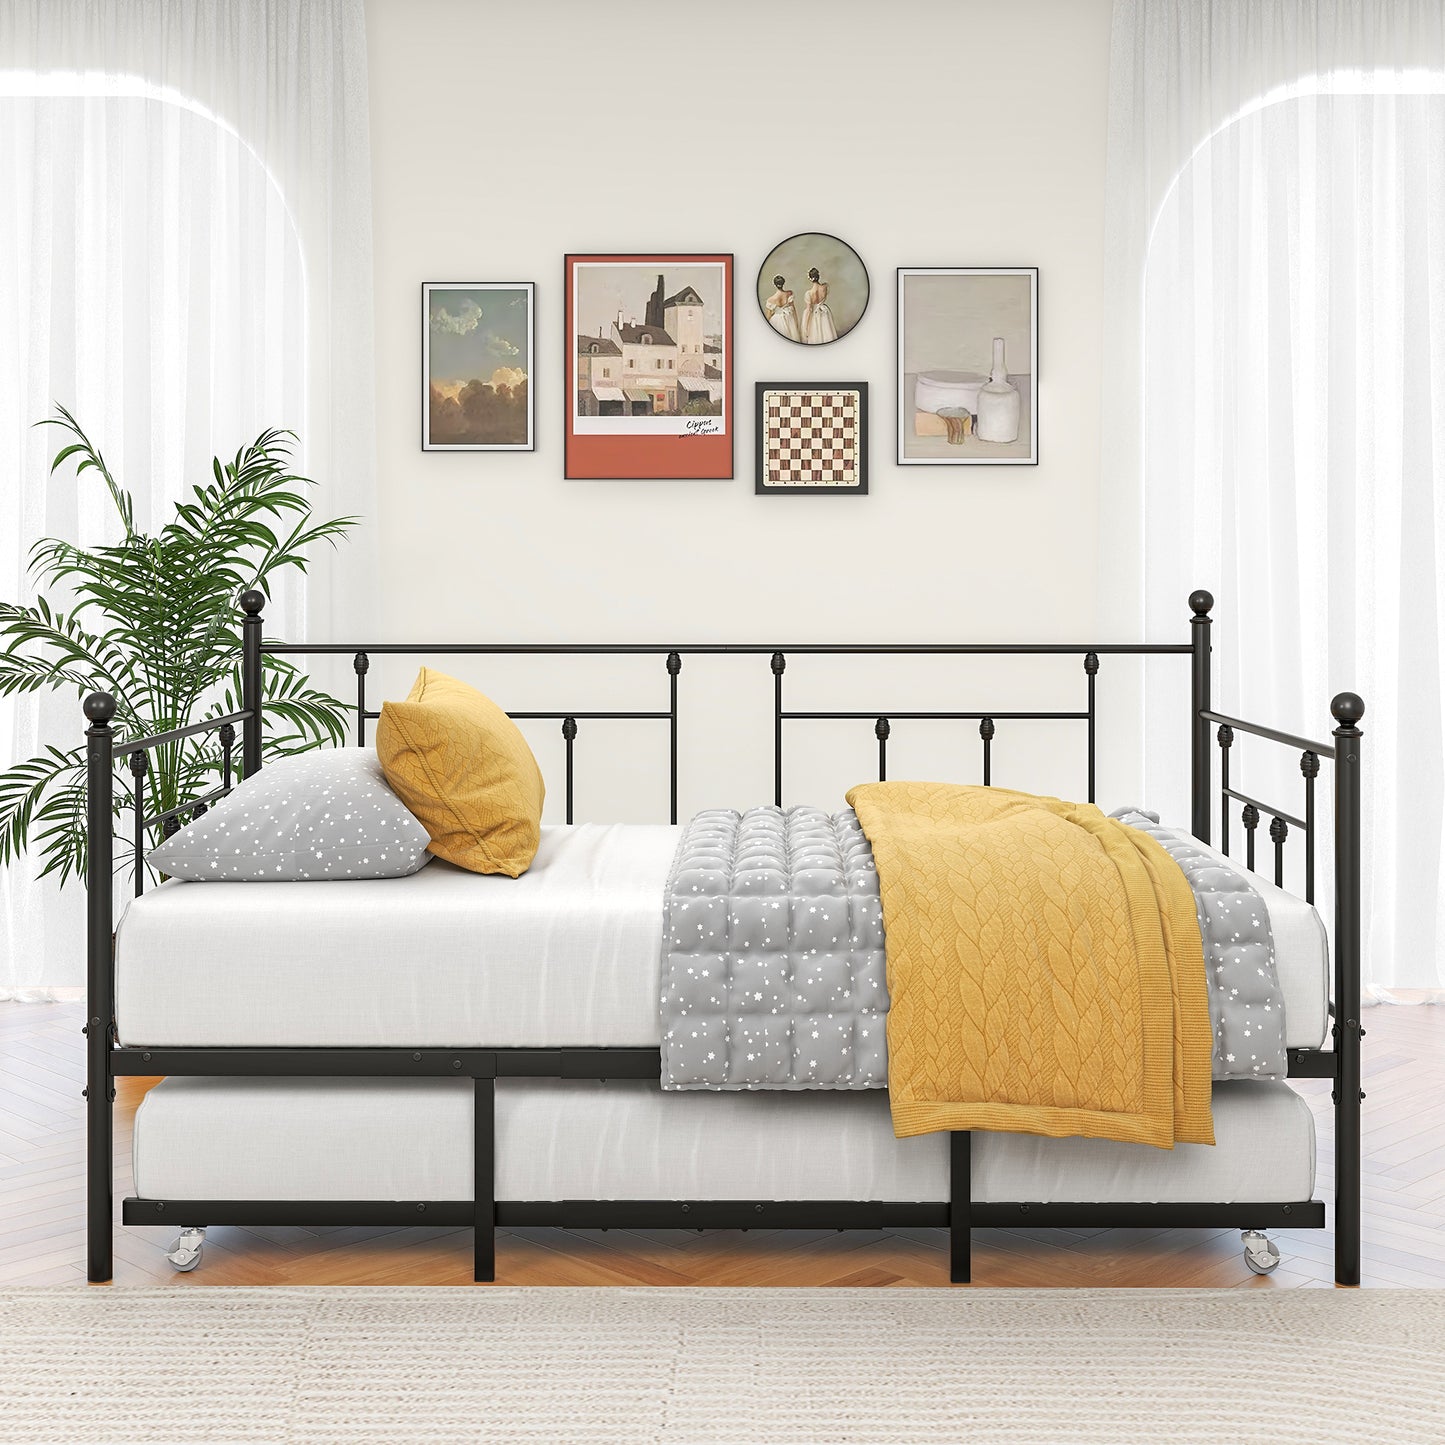 Twin-Sized Full Metal Pull-Out Daybed Bedframe with Trundle No Box Spring_1